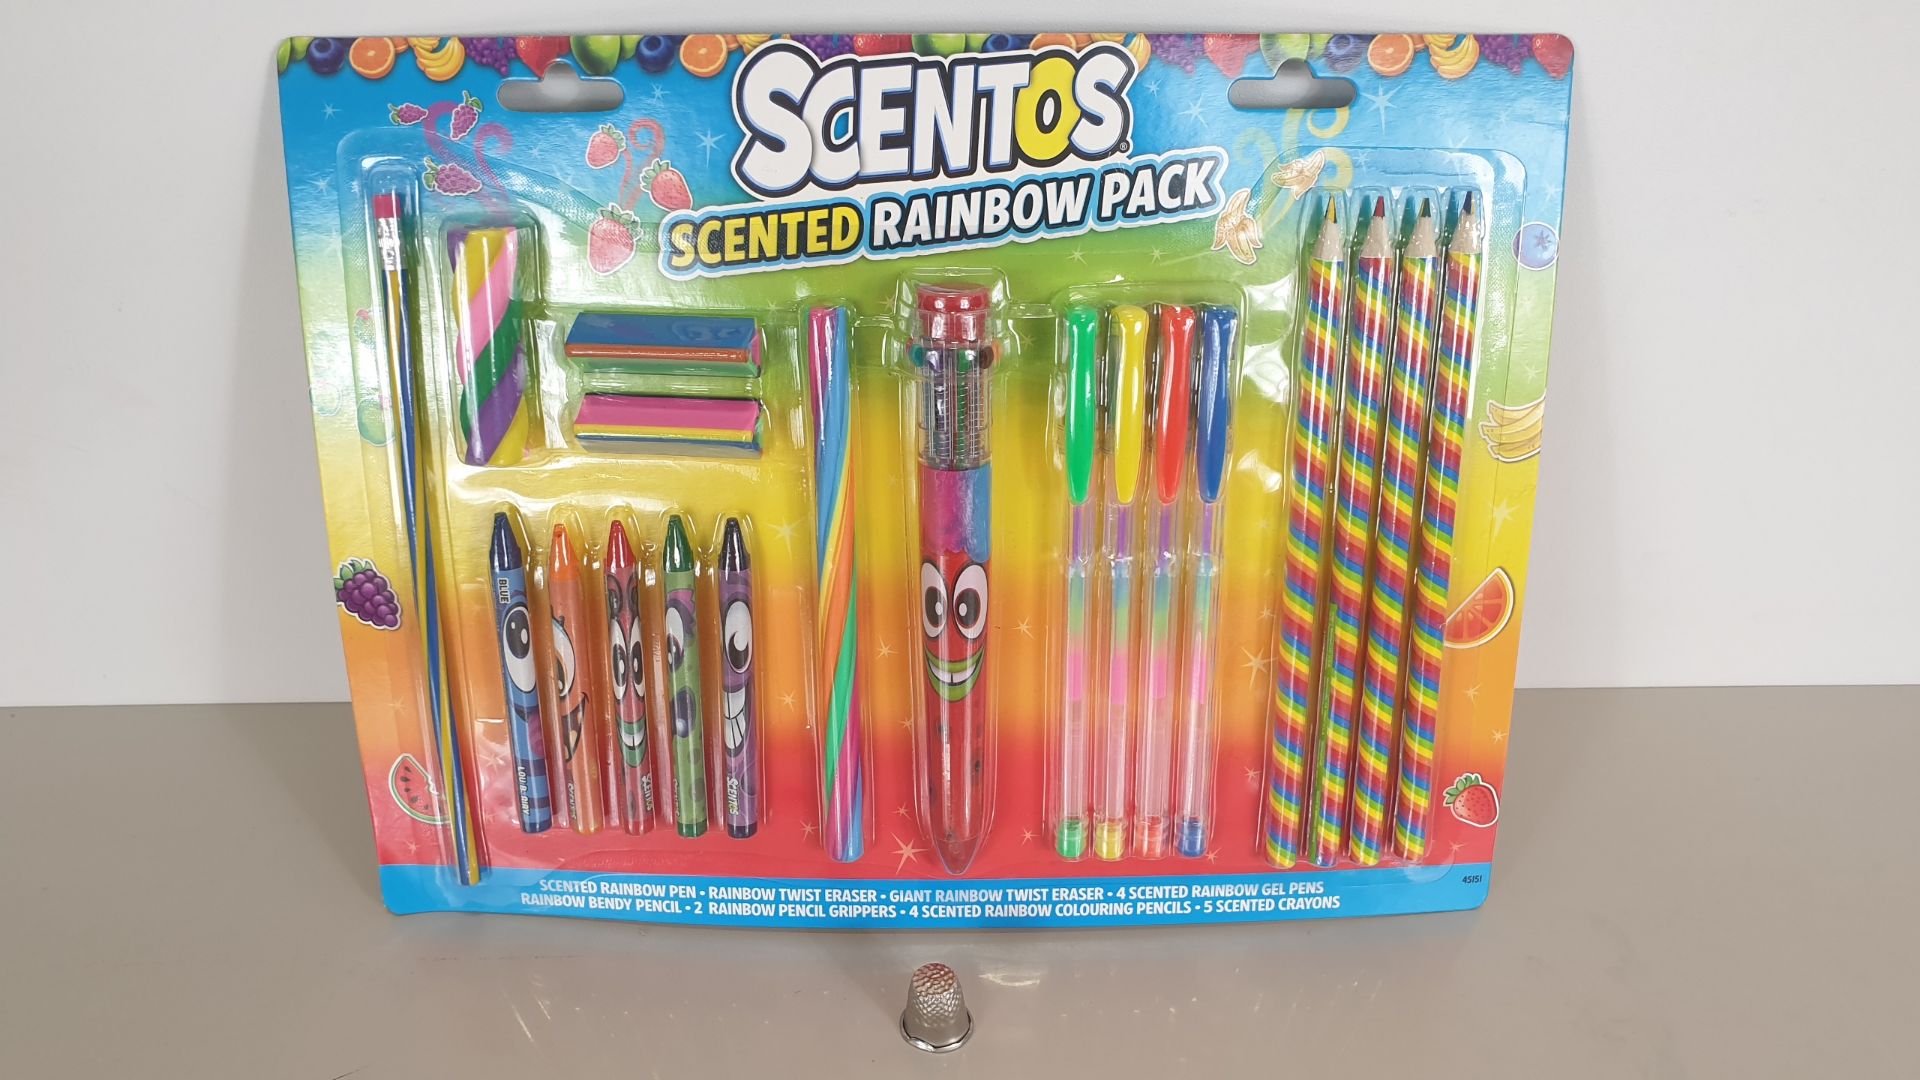 96 X BRAND NEW SCENTOS SENTED RAINBOW PACK OF PENS, PENCILS, CRAYONS AND RUBBERS ETC. ALL